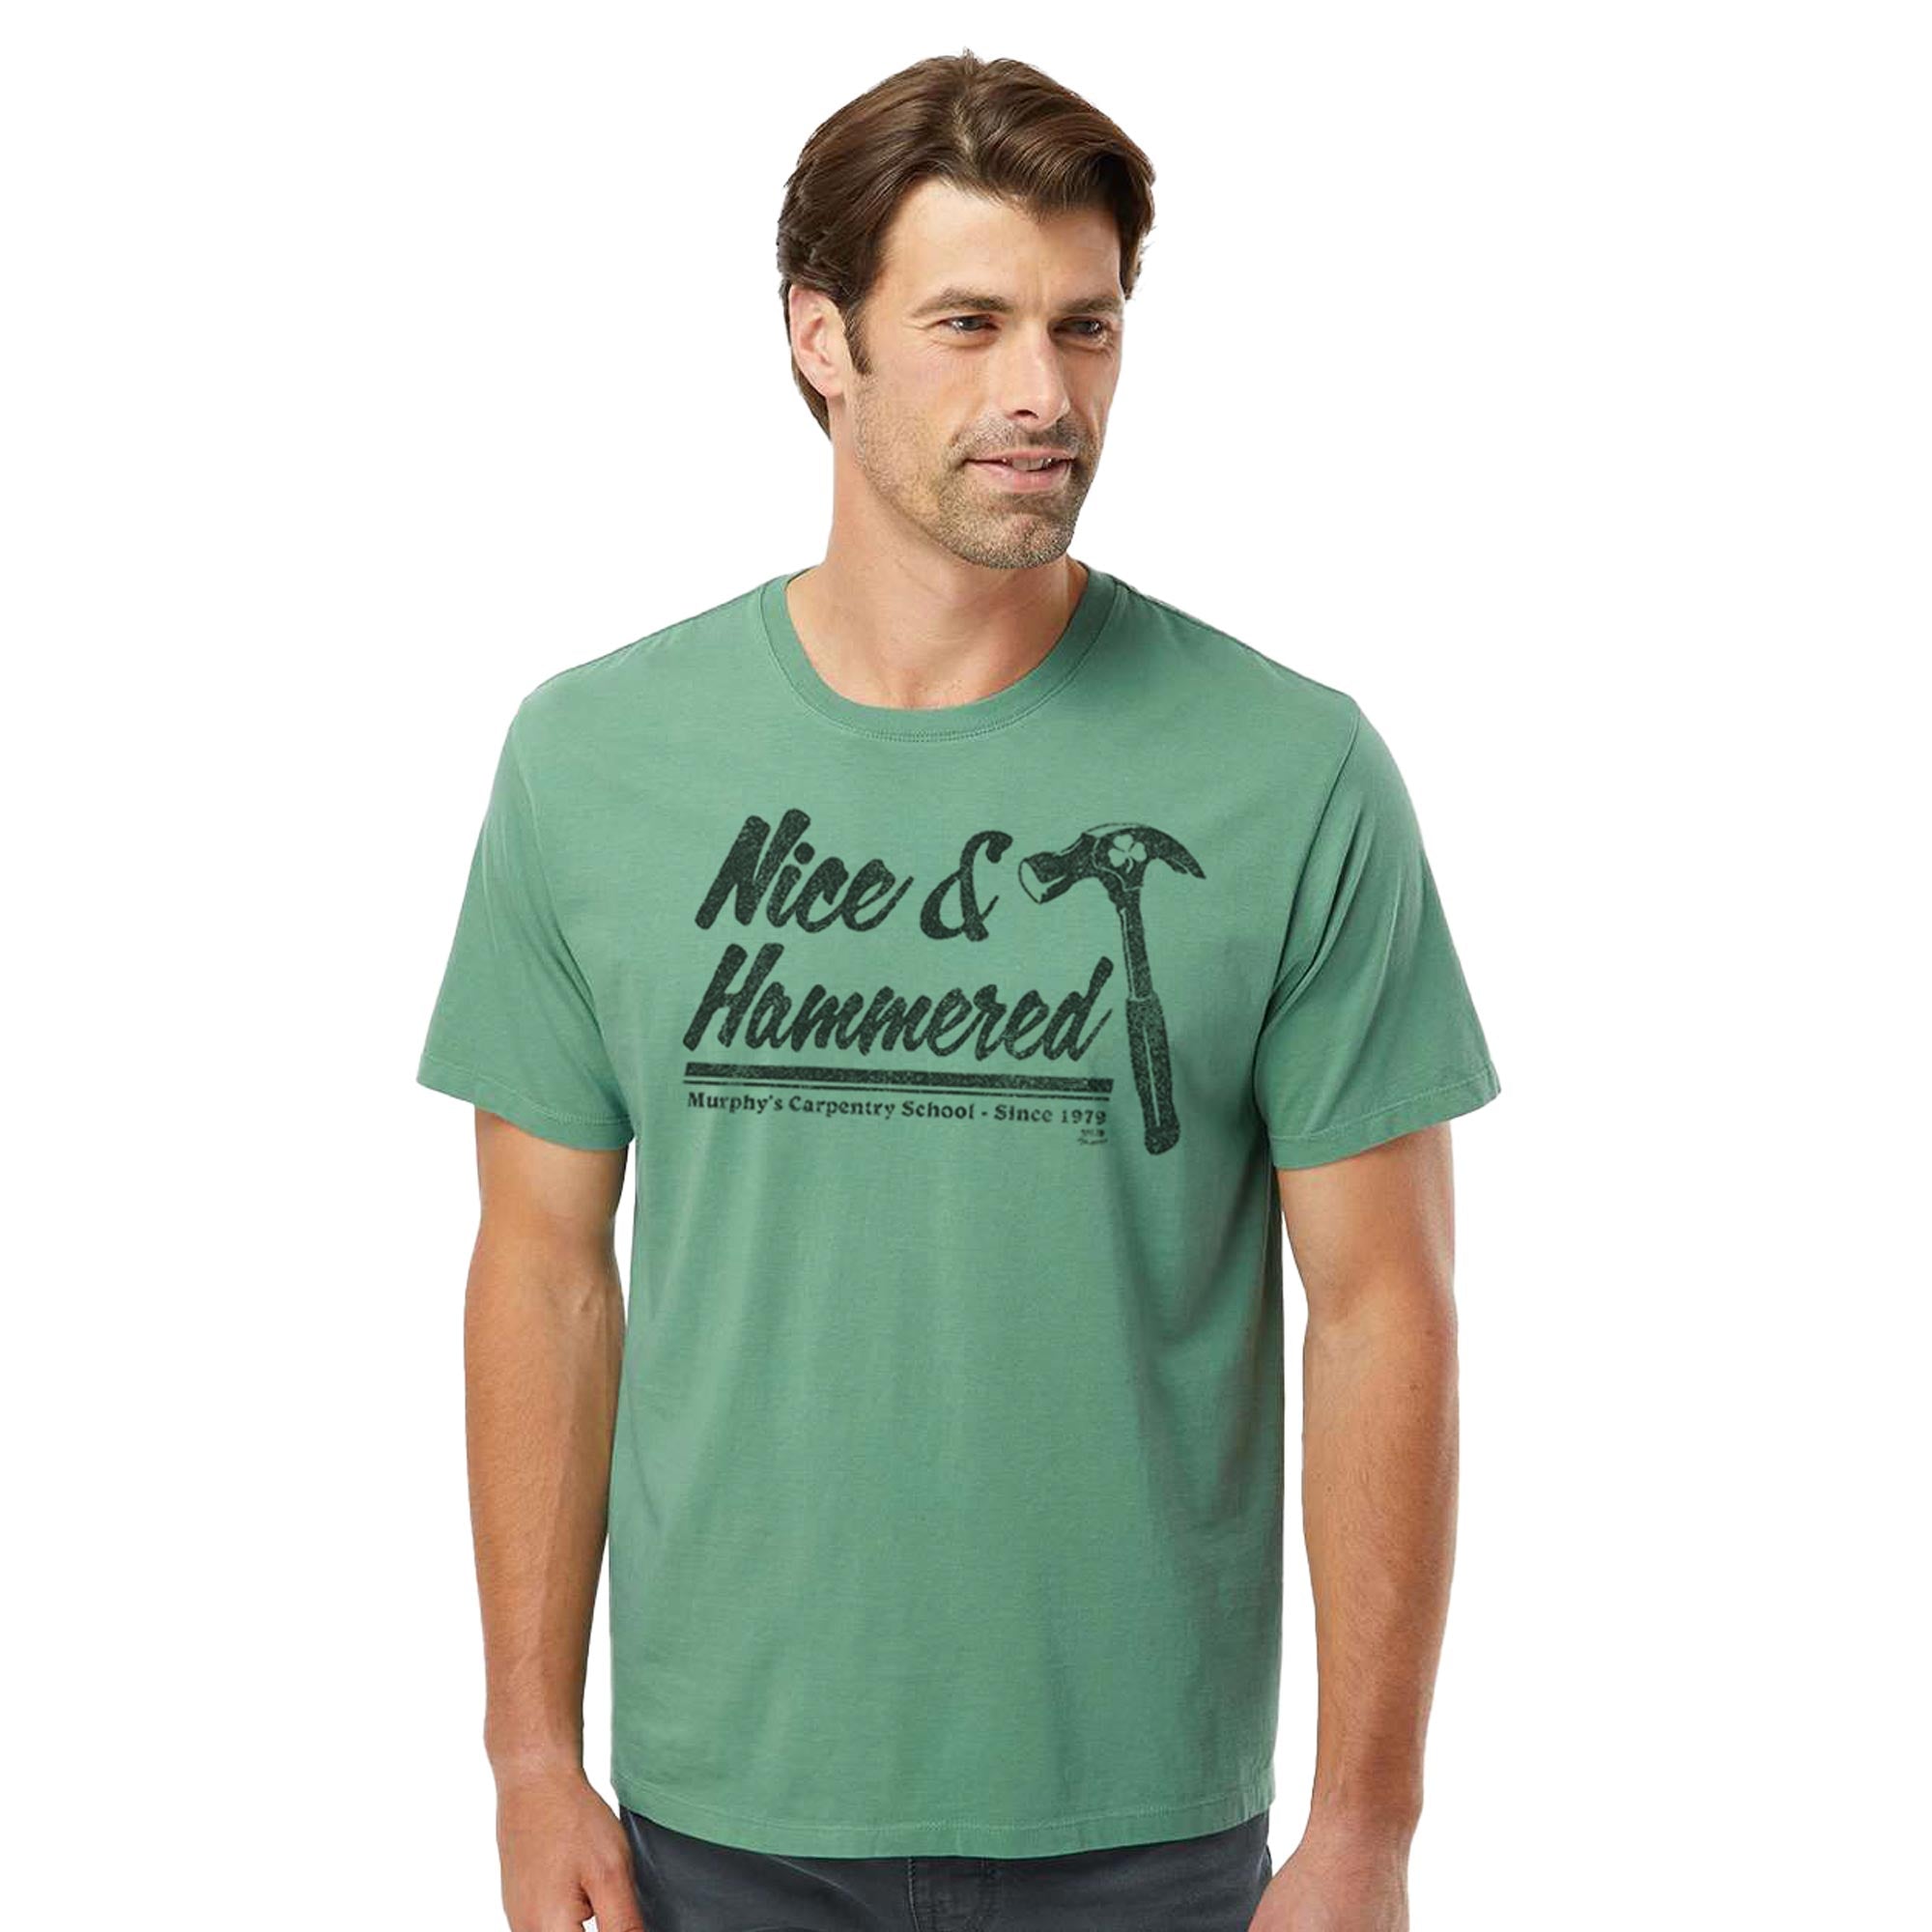 Nice & Hammered Vintage Organic Cotton T-shirt | Cool Always Sunny  Tee | Solid Threads